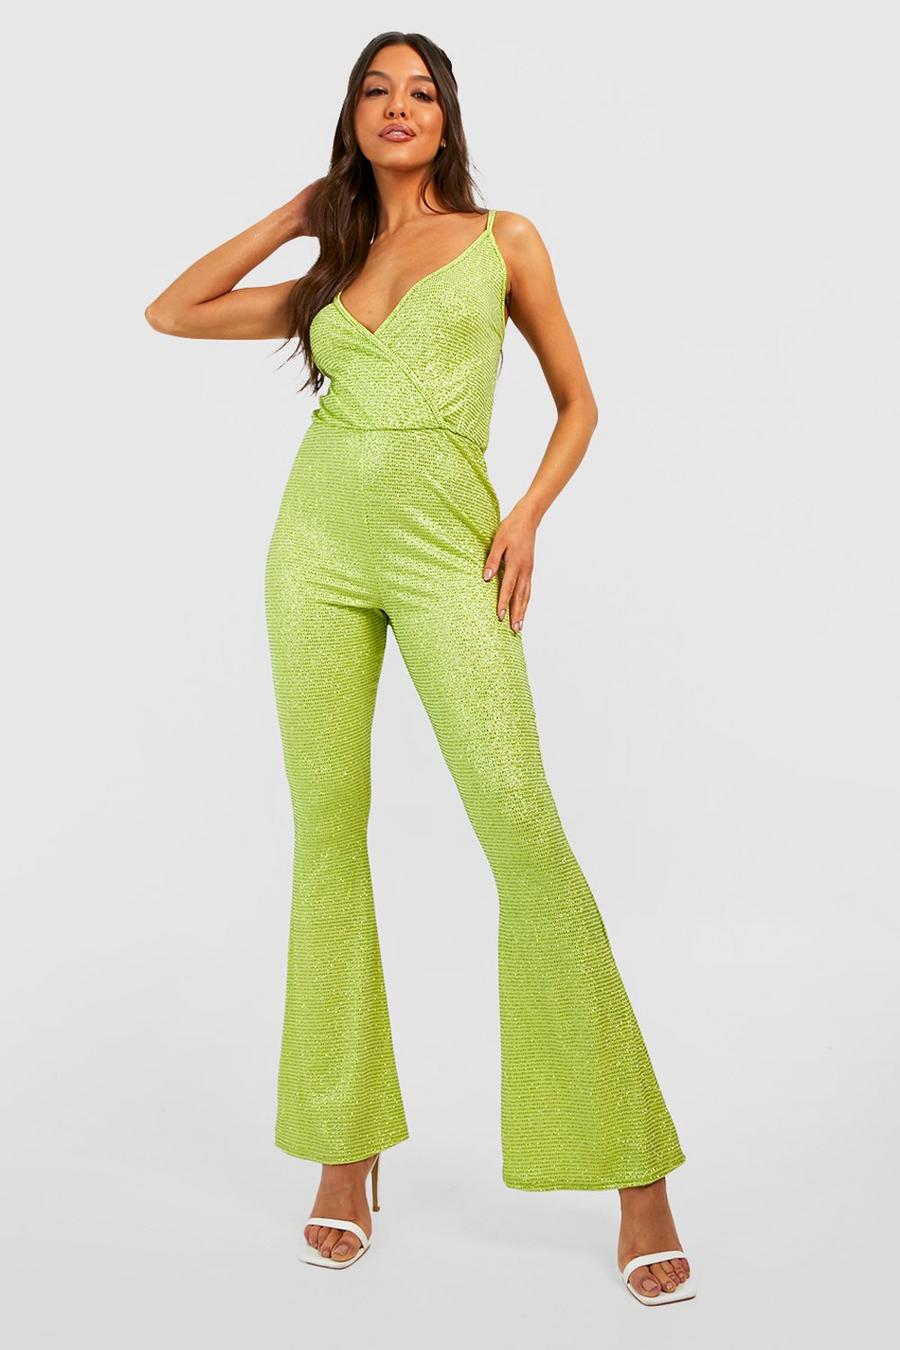 Lime green Shimmer Glitter Strappy Cowl Flare Jumpsuit